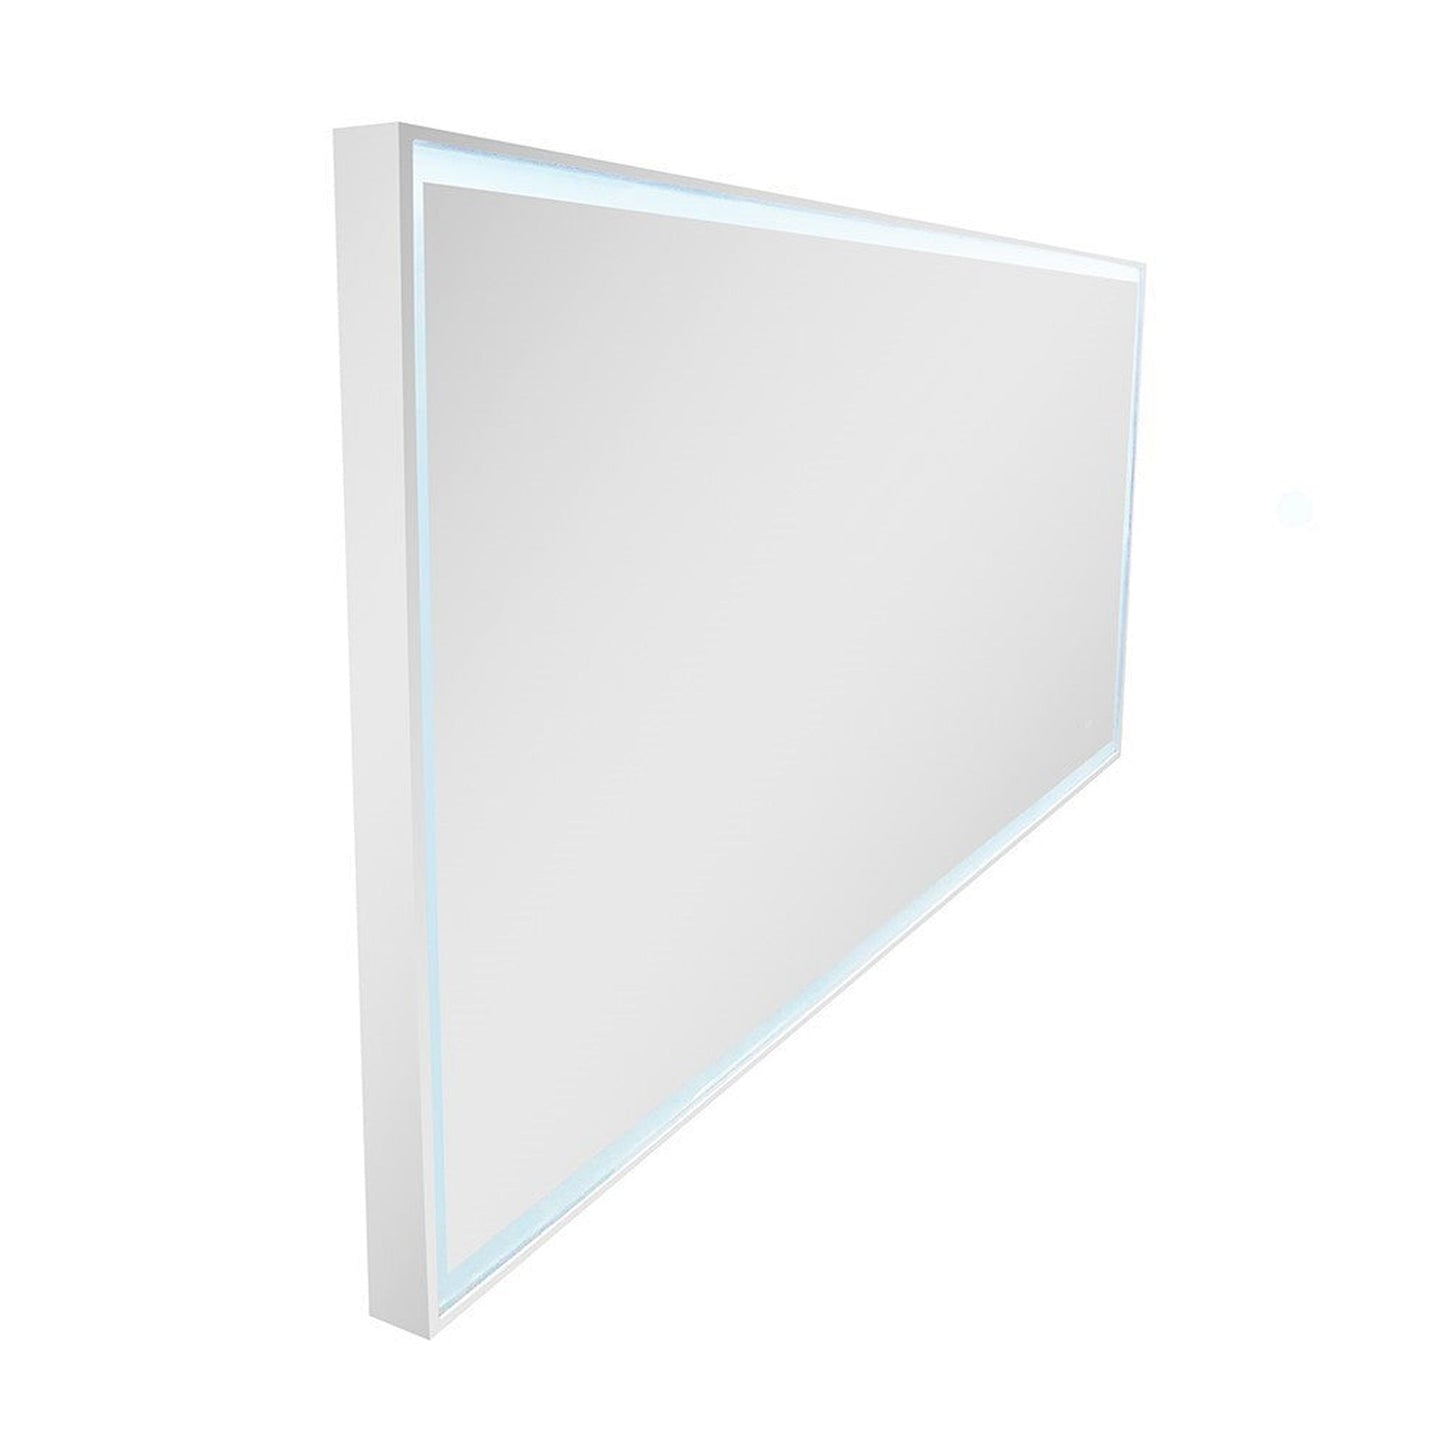 Bellaterra Home 59" x 28" Rectangle Wall-Mounted LED Bordered Illuminated Mirror